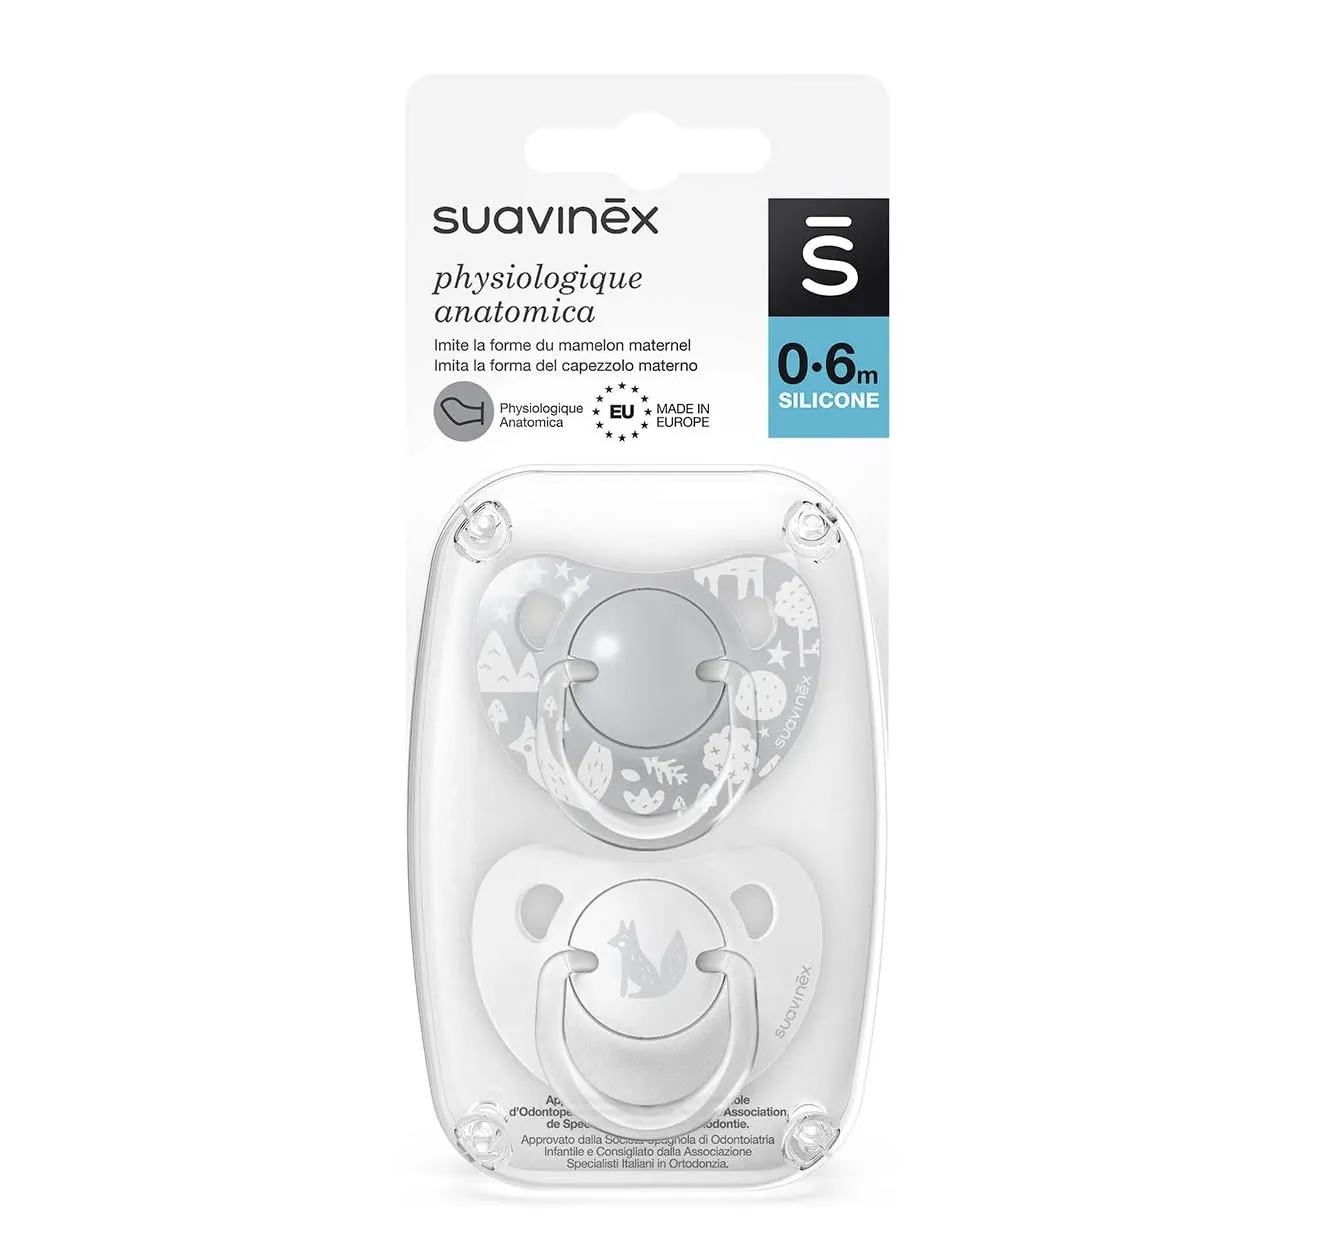 1 sucette physiologique 100% silicone 0-6m - Tigex